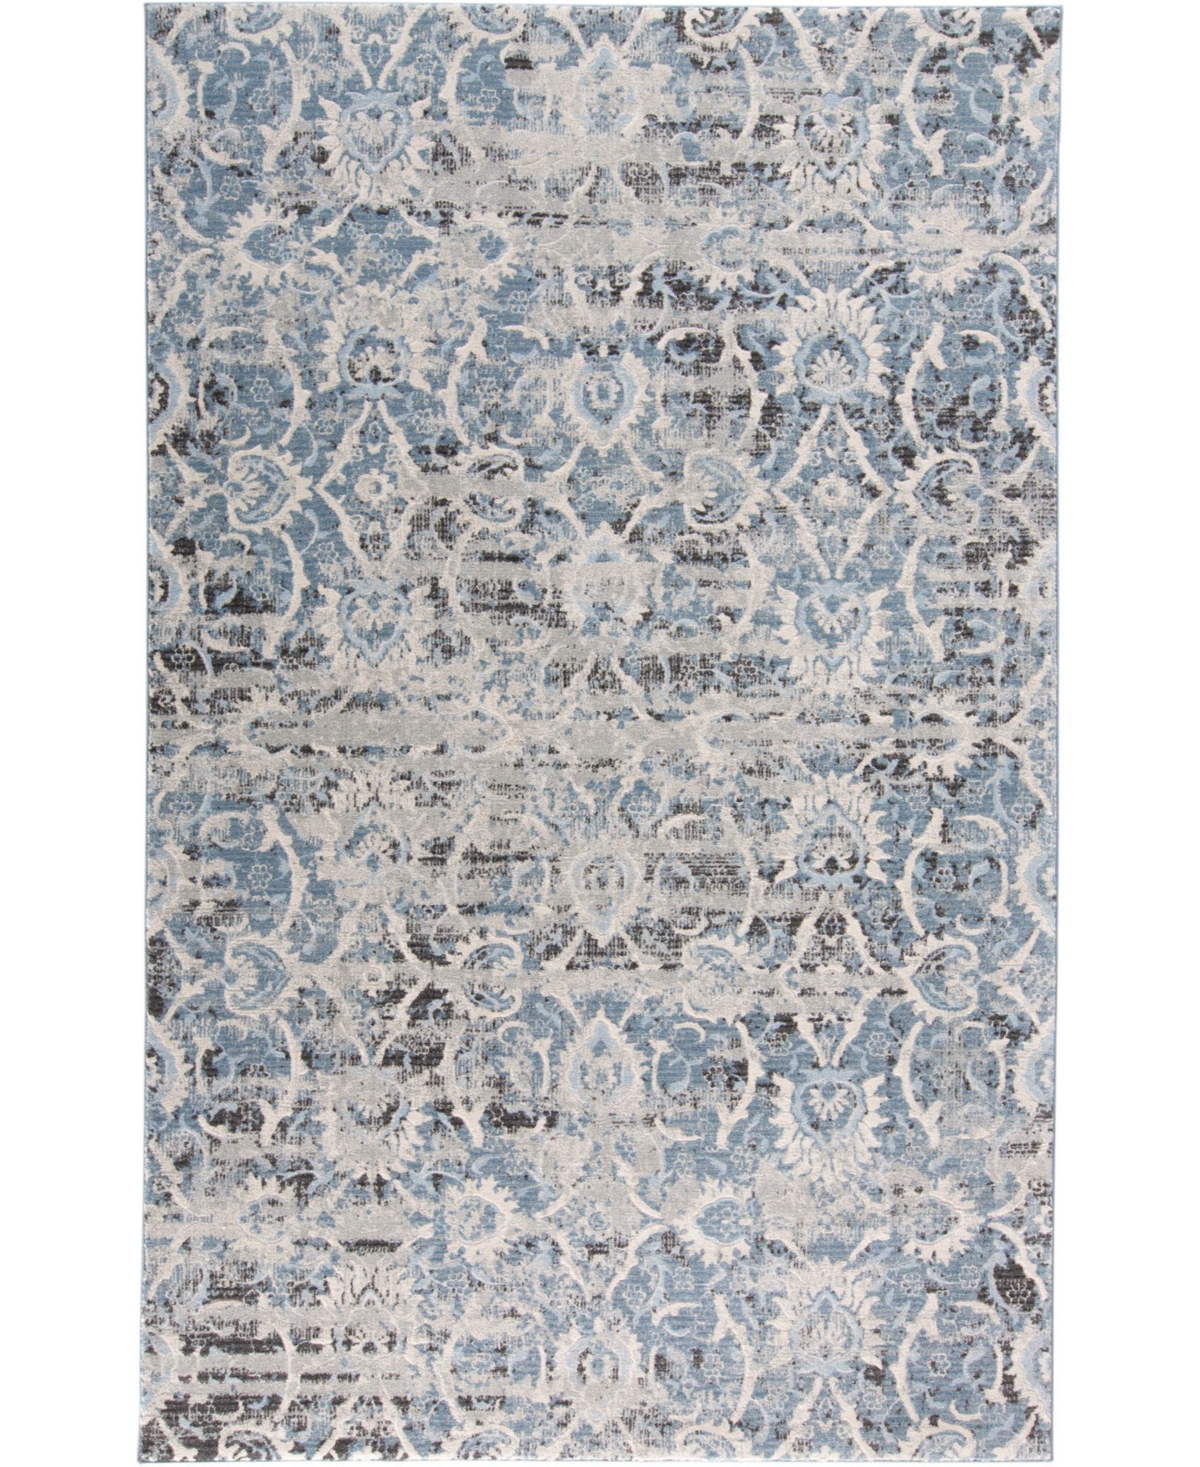 Feizy Millie R3901 Blue 6'7in x 9'6in Area Rug - Blue